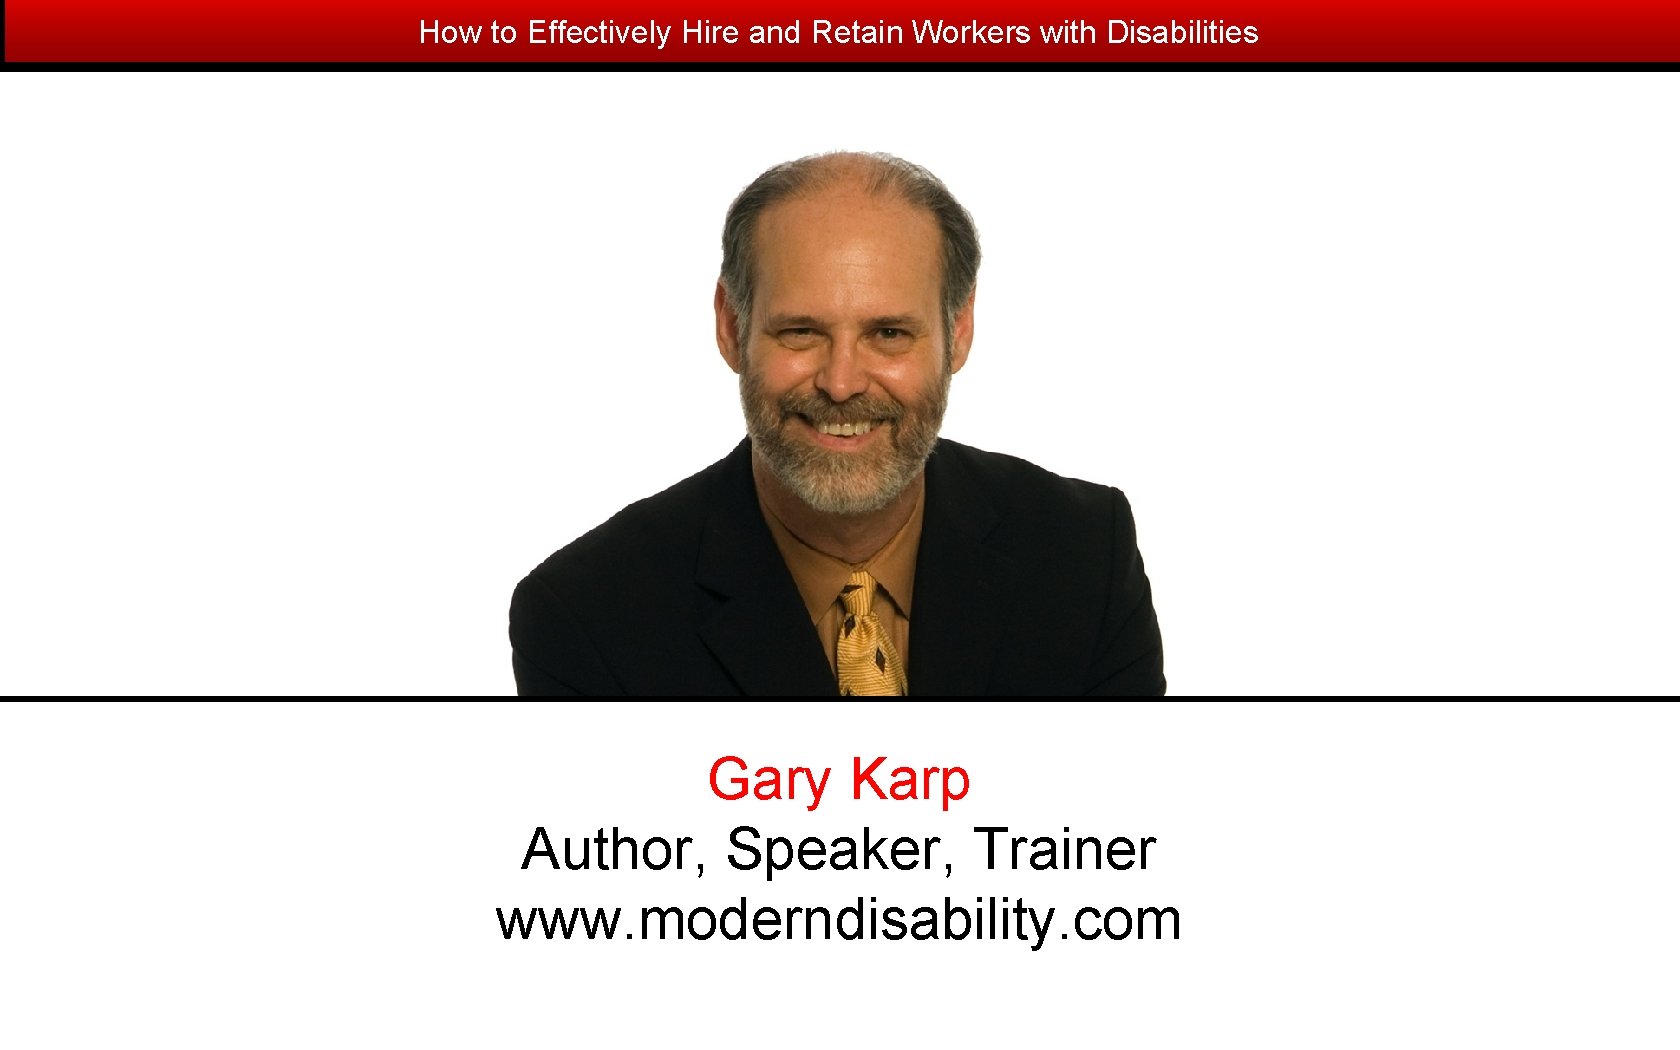 How to Effectively Hire and Retain Workers with Disabilities Gary Karp Author, Speaker, Trainer